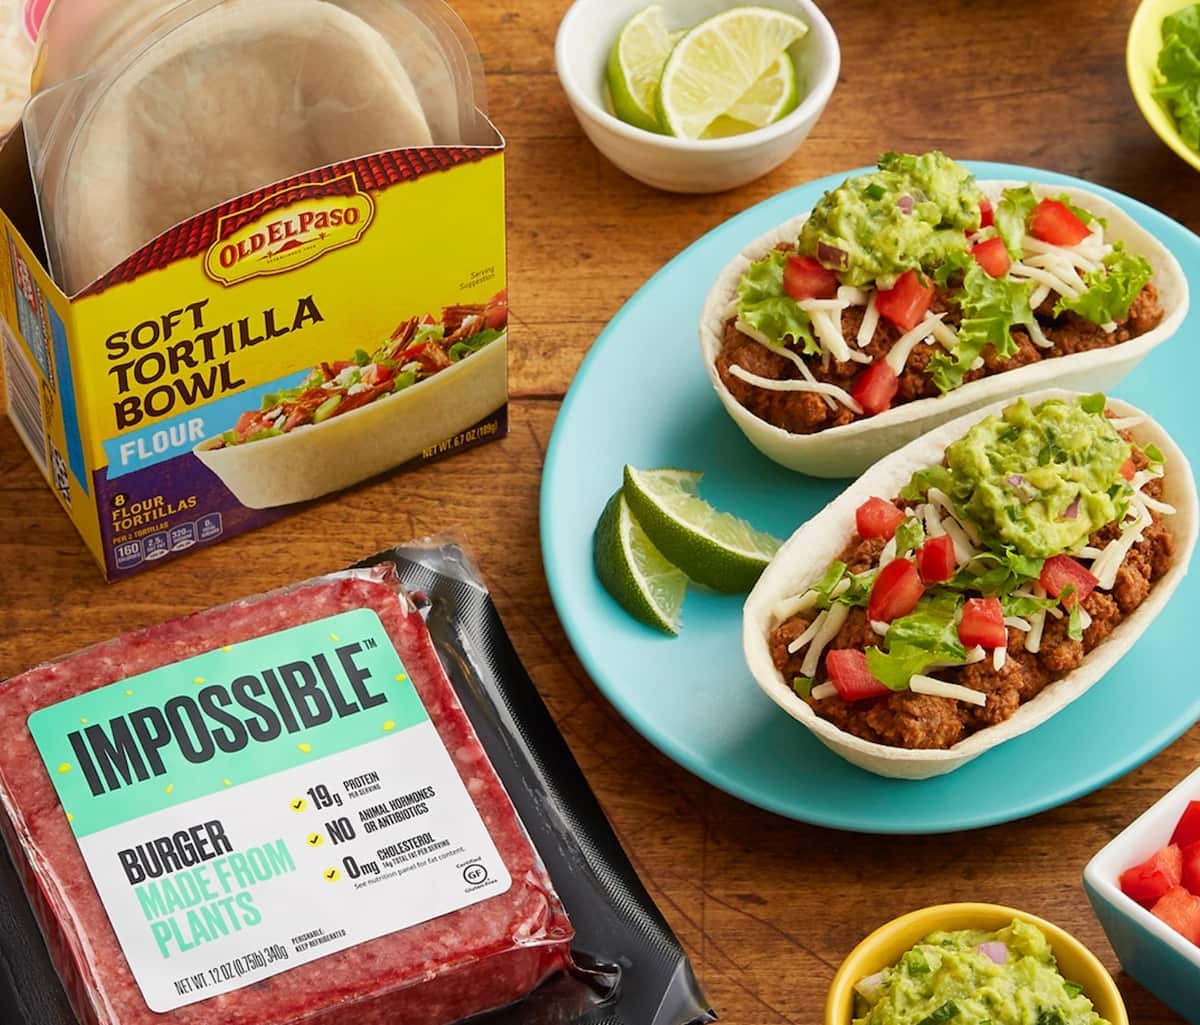 Old El Paso soft tortilla bowls served with vegan Impossible ground beef and guacamole.